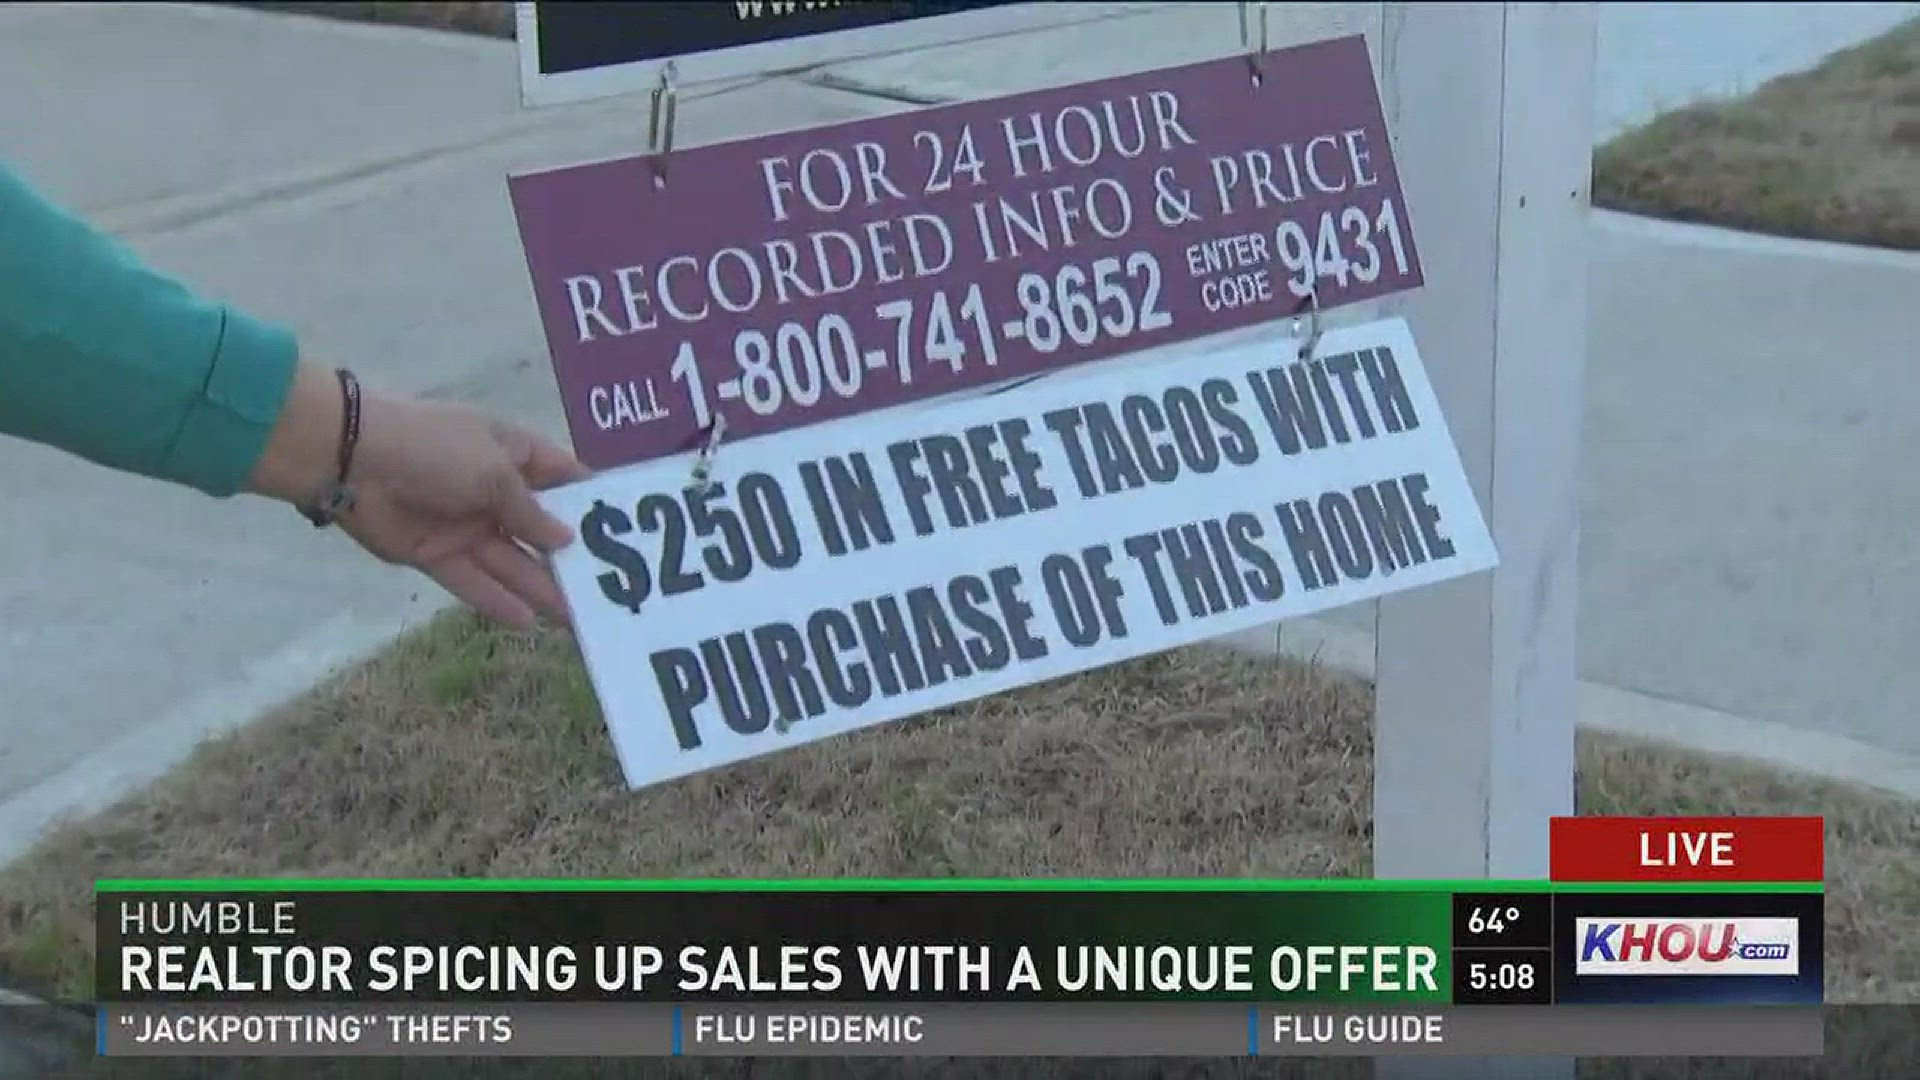 A realtor is spicing up sales with a unique offer of $250 worth of tacos with a home purchase.